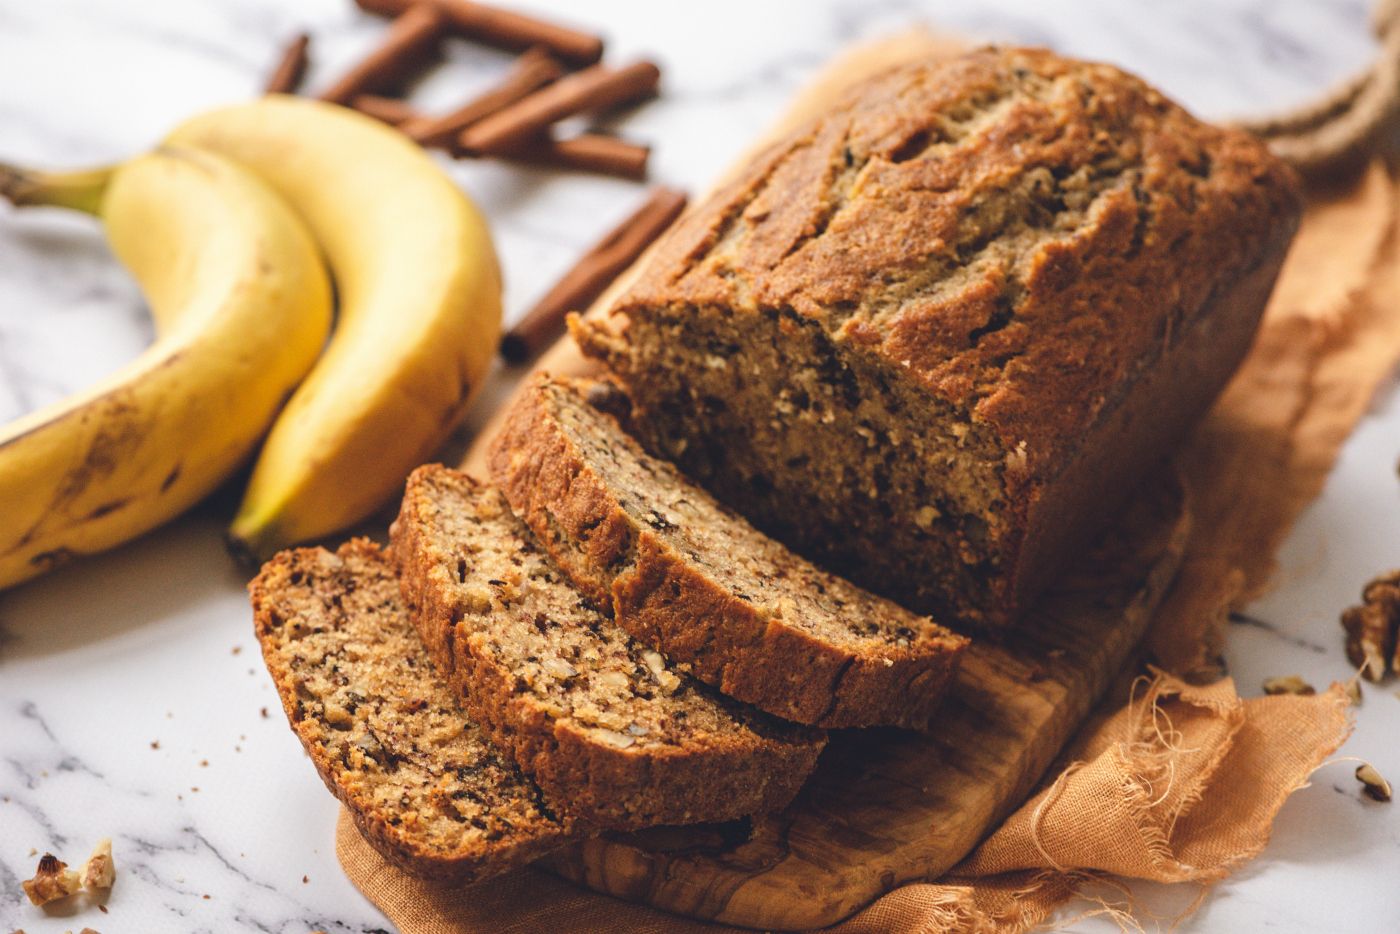 Bananas and whole grain breads provide a healthy breakfast